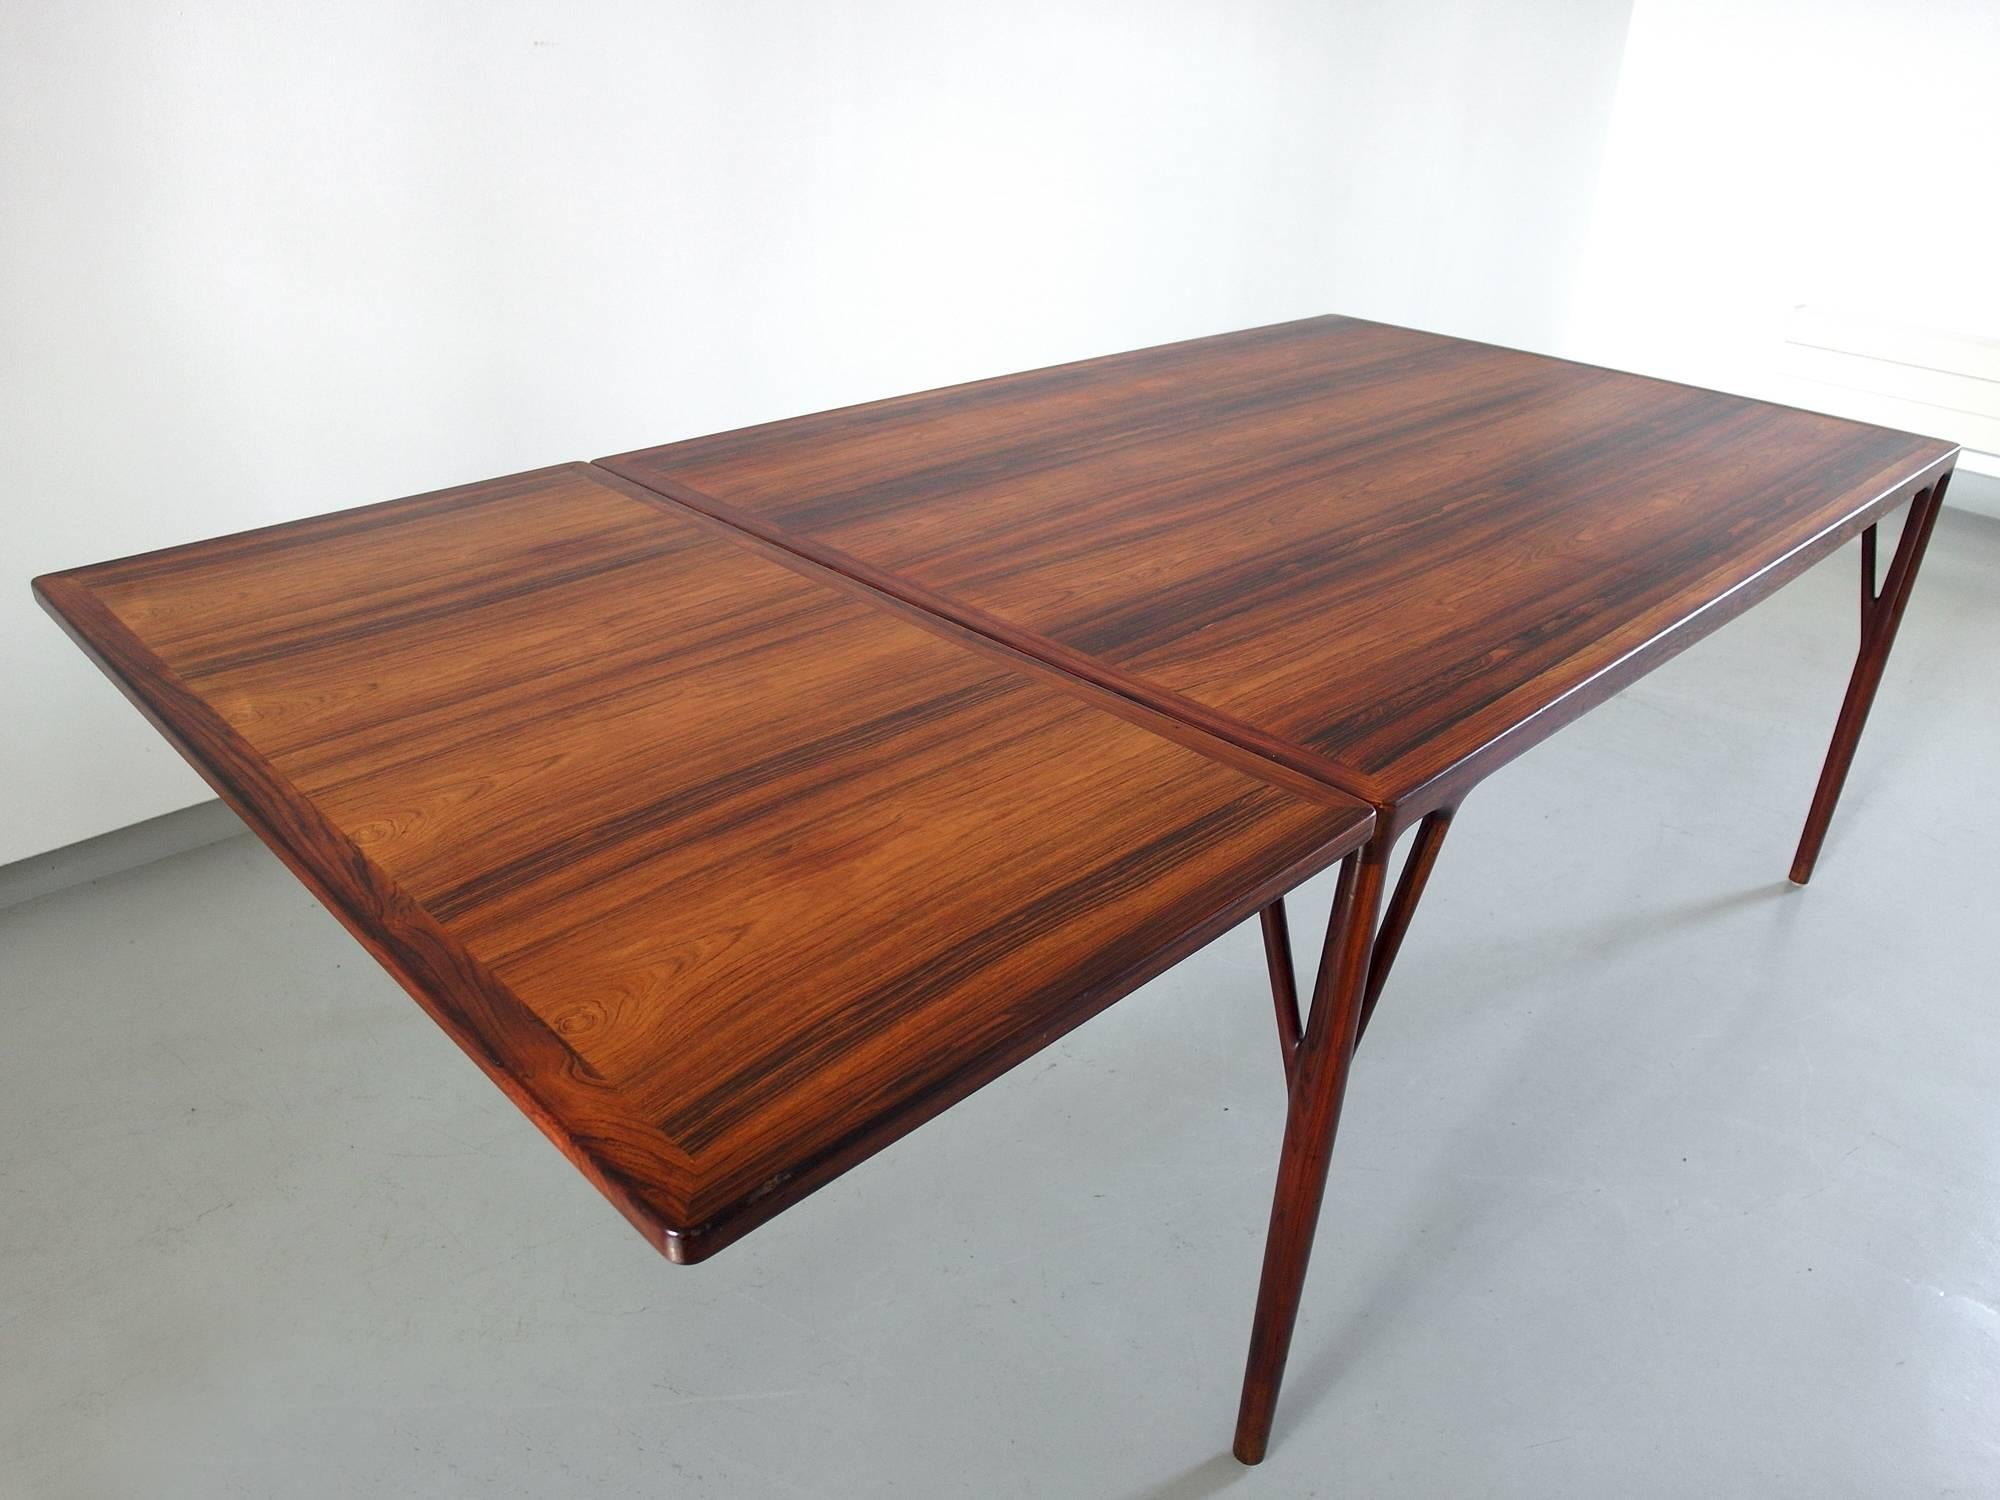 Mid-20th Century Helge Vestergaard Jensen Sculptural Dining Table with Extension, Denmark, 1957